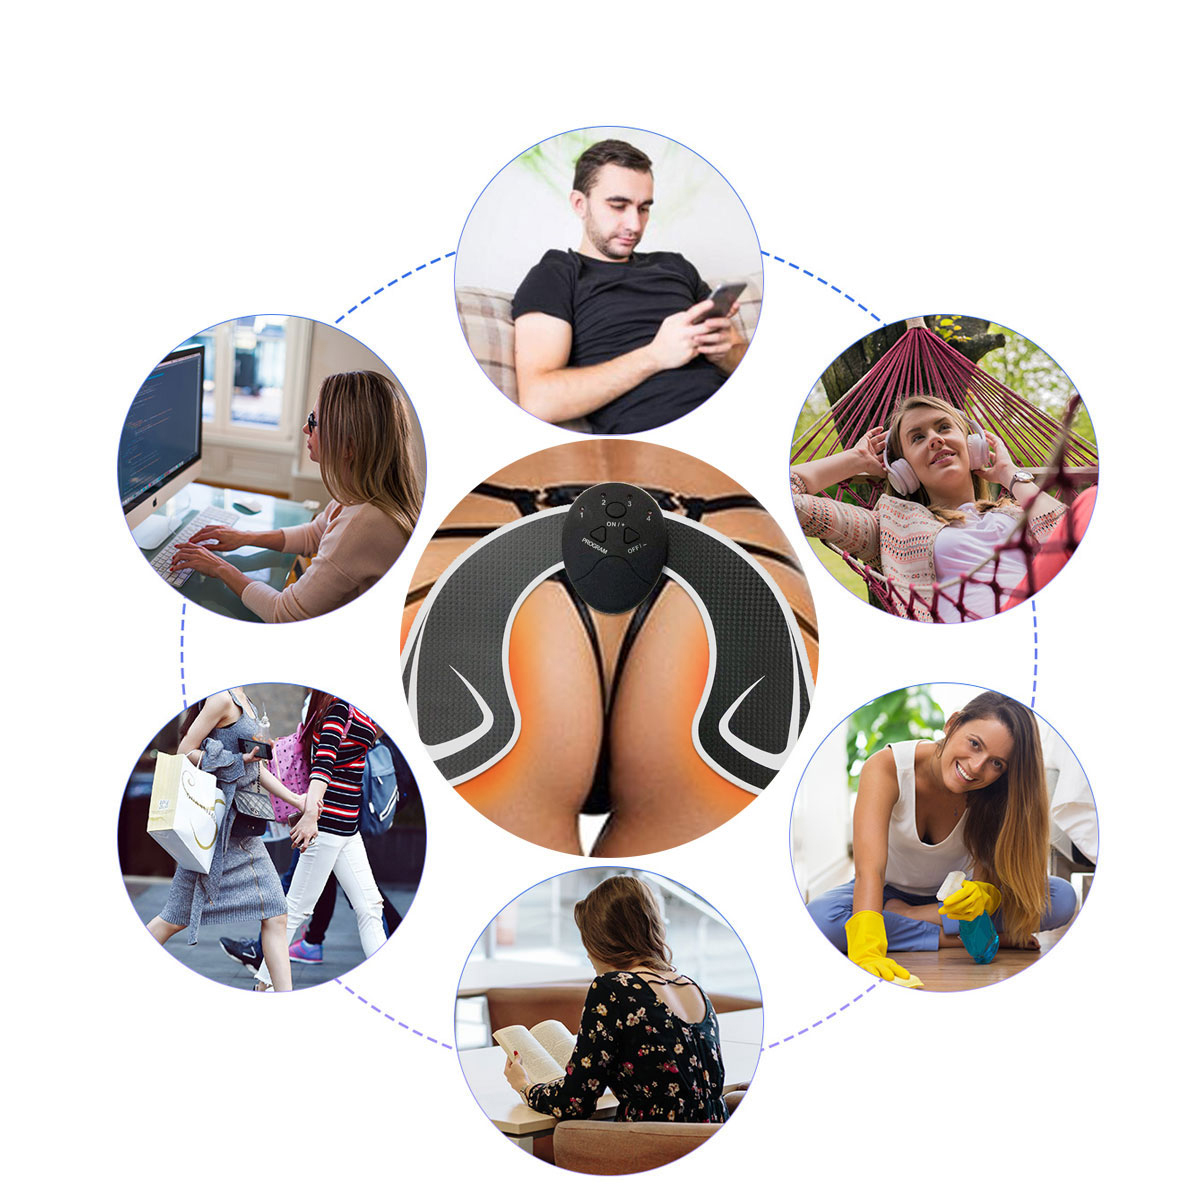 Hip-Trainer-Sticker-Hanche-Fesses-Muscle-Stimulation-Buttocks-Up-Stickers-1309518